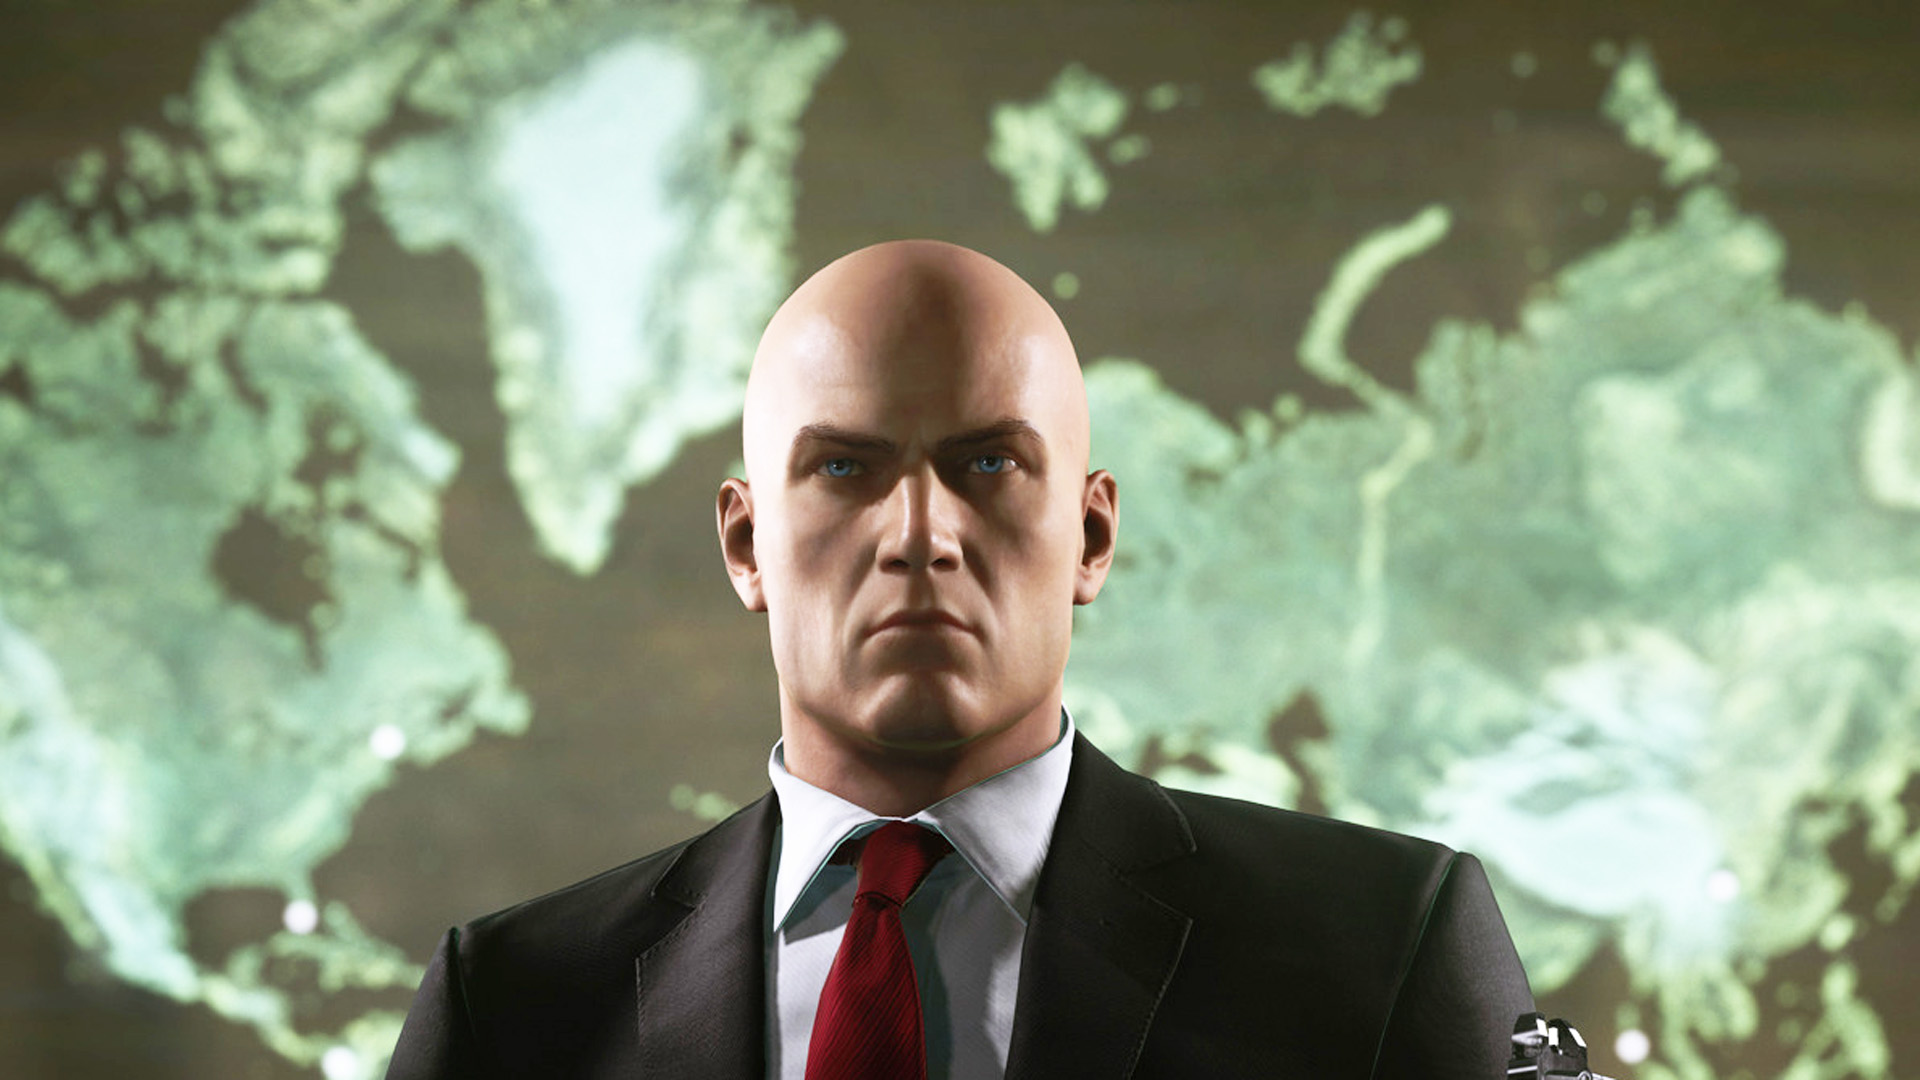 This fantastic Hitman 3 fan-briefing needs to be a real DLC mission